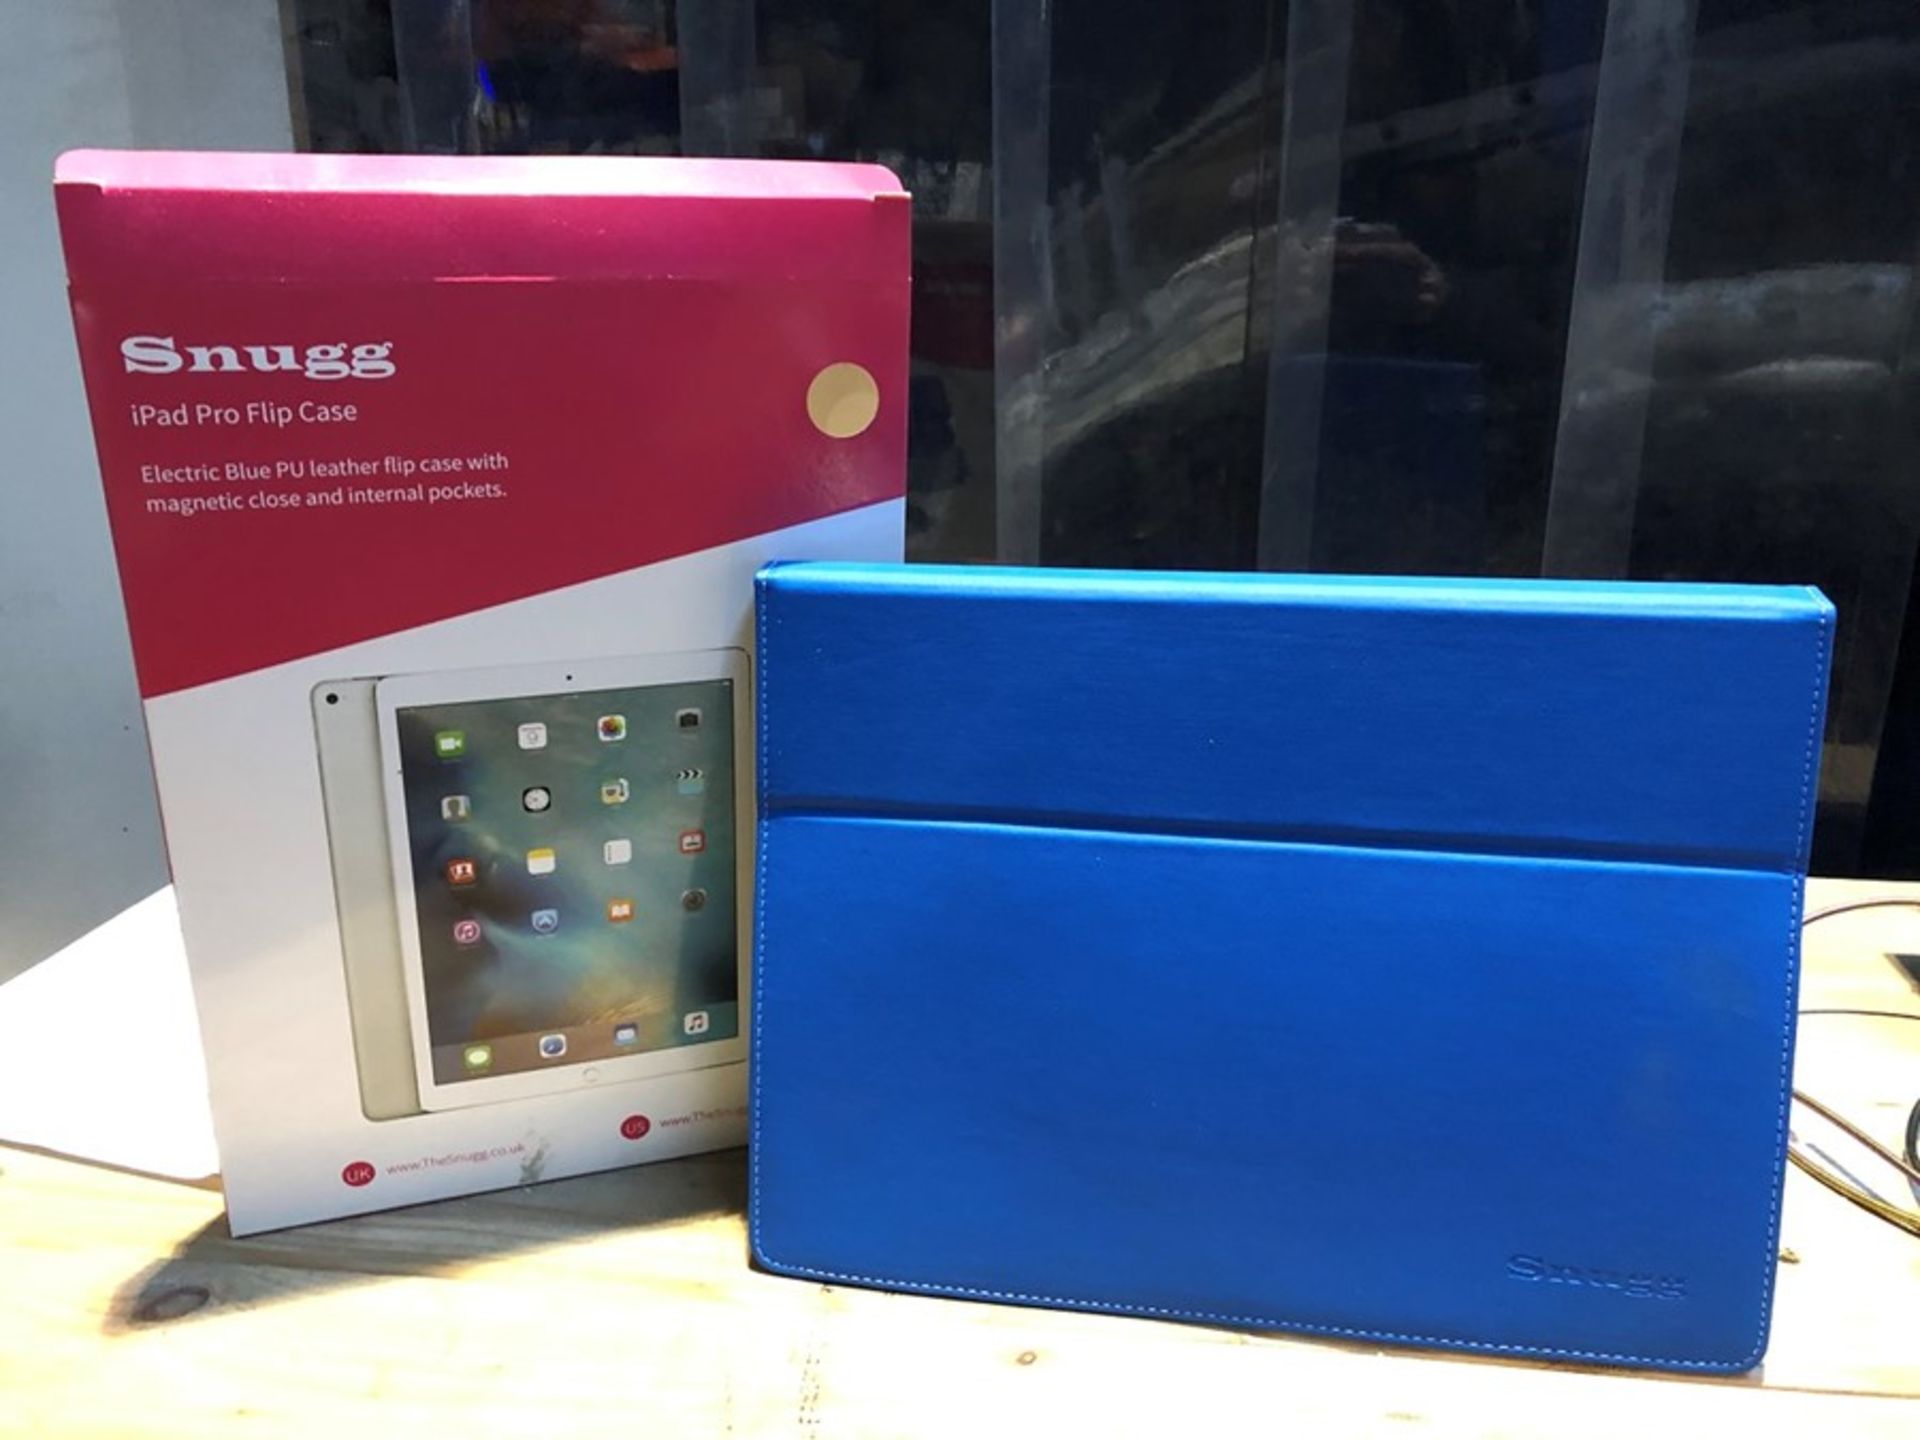 1 LOT TO CONTAIN 10 BOXED SNUGG IPAD PRO FLIP CASES 12.9 INCH IN BLUE / RRP £249.90 (PUBLIC